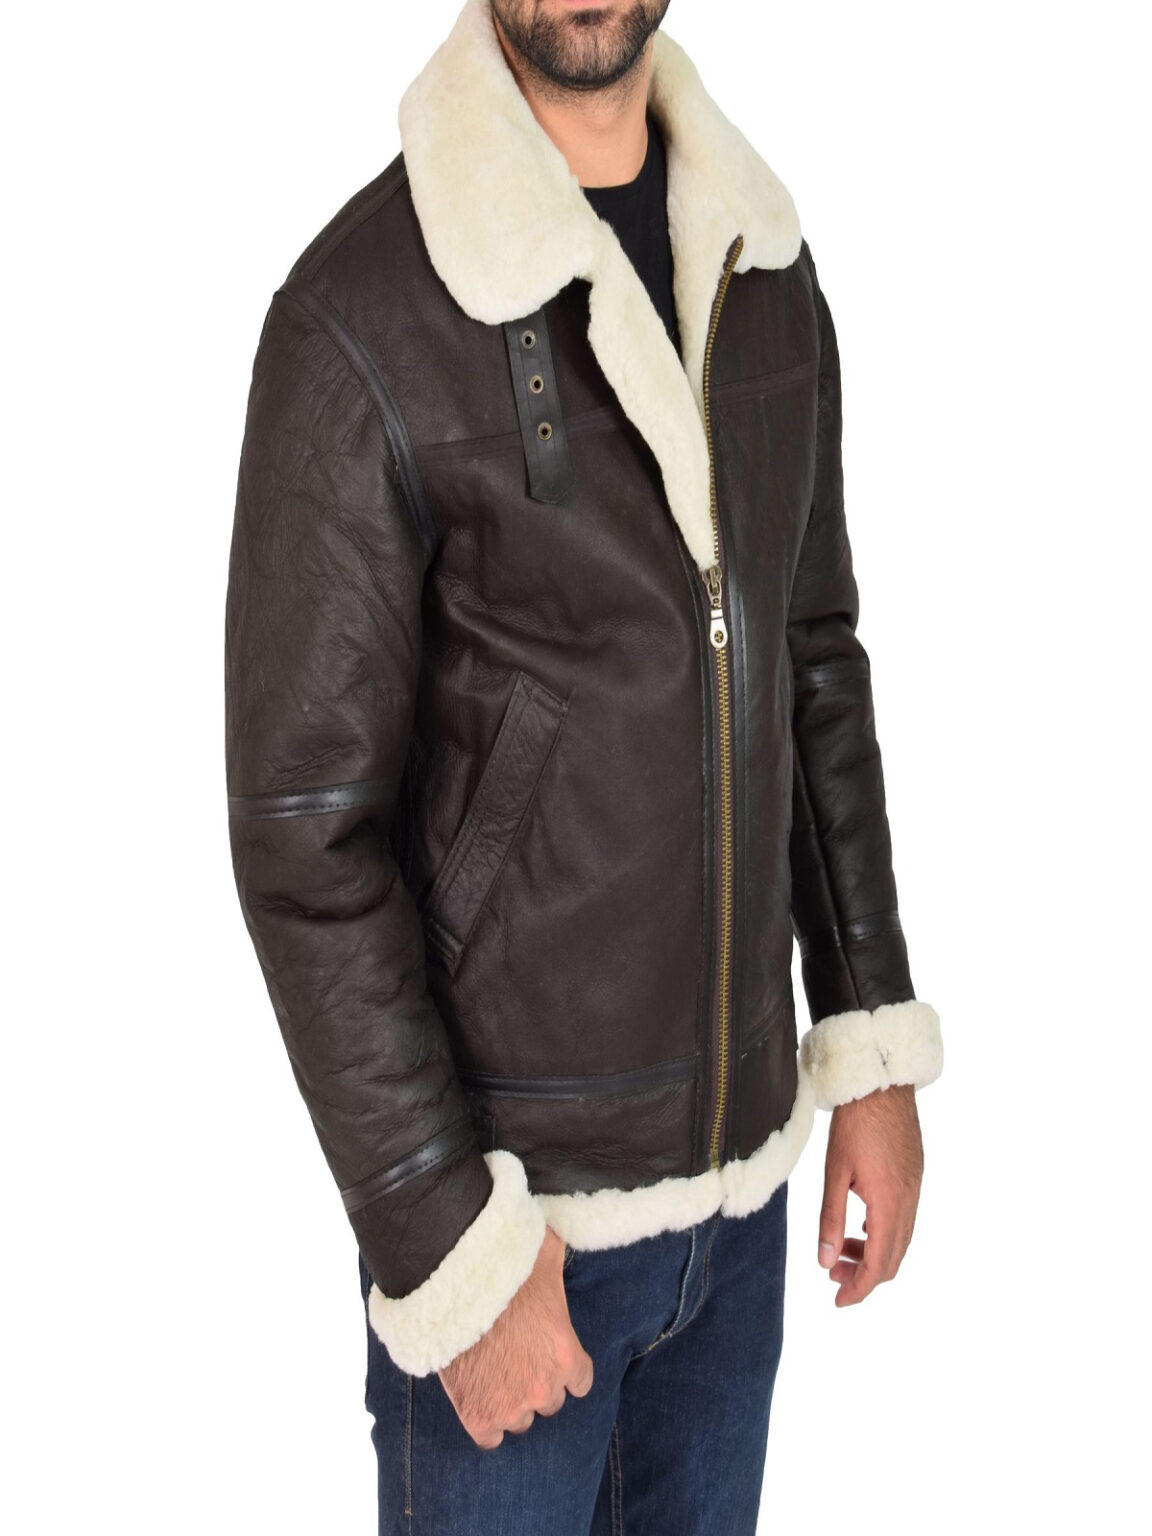 Men's Genuine Leather Bomber Jackets - Shearling Leather Jackets